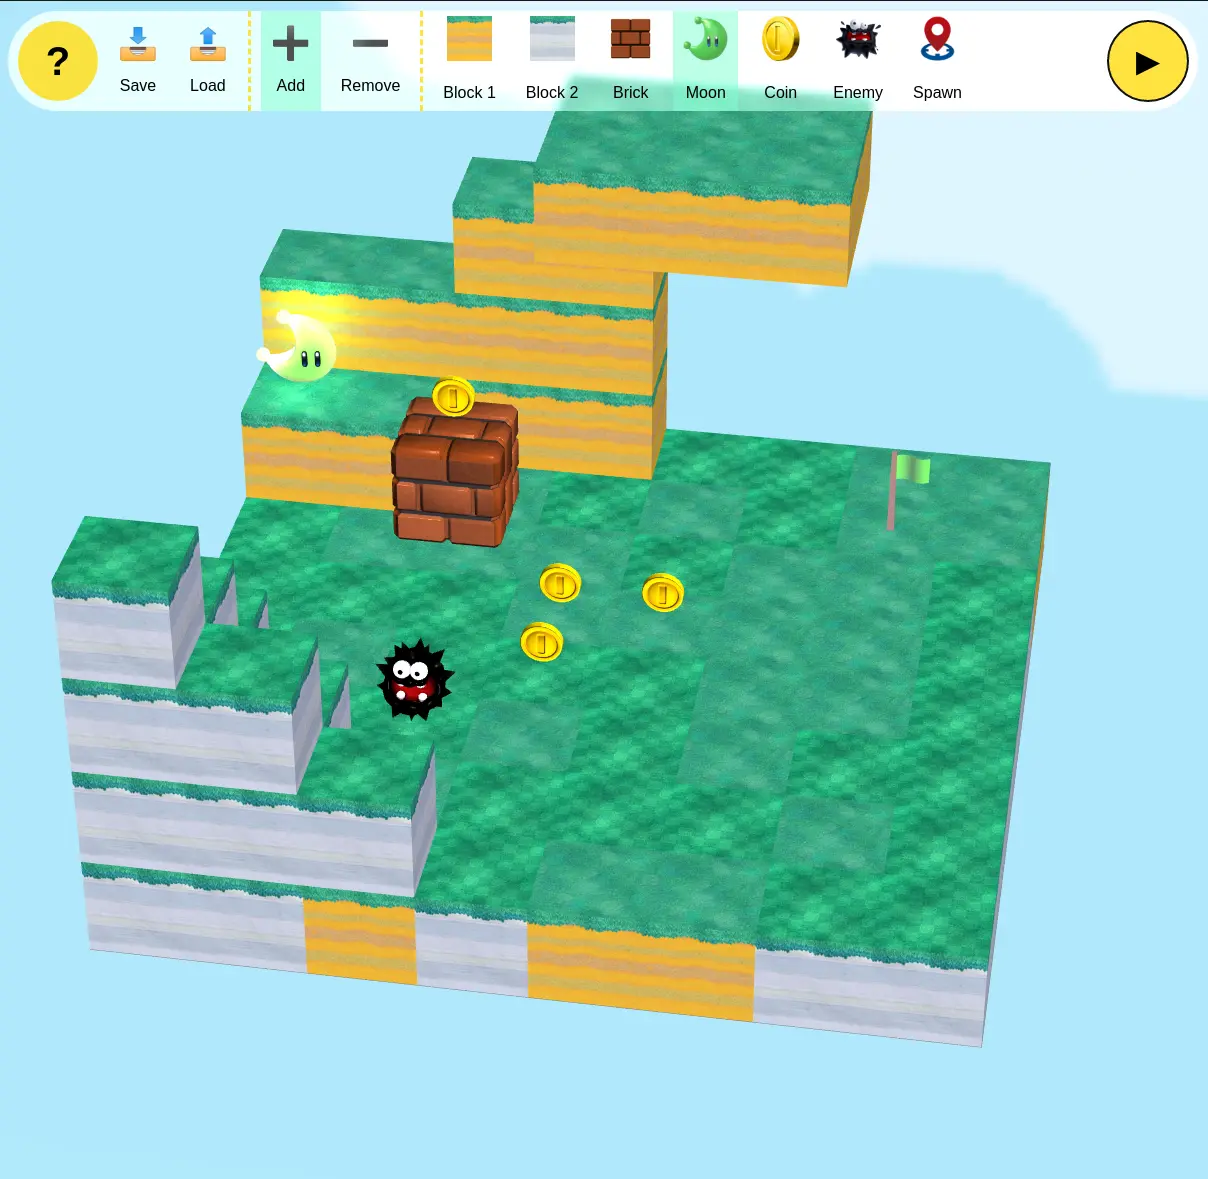 Example of the same level but in editor mode